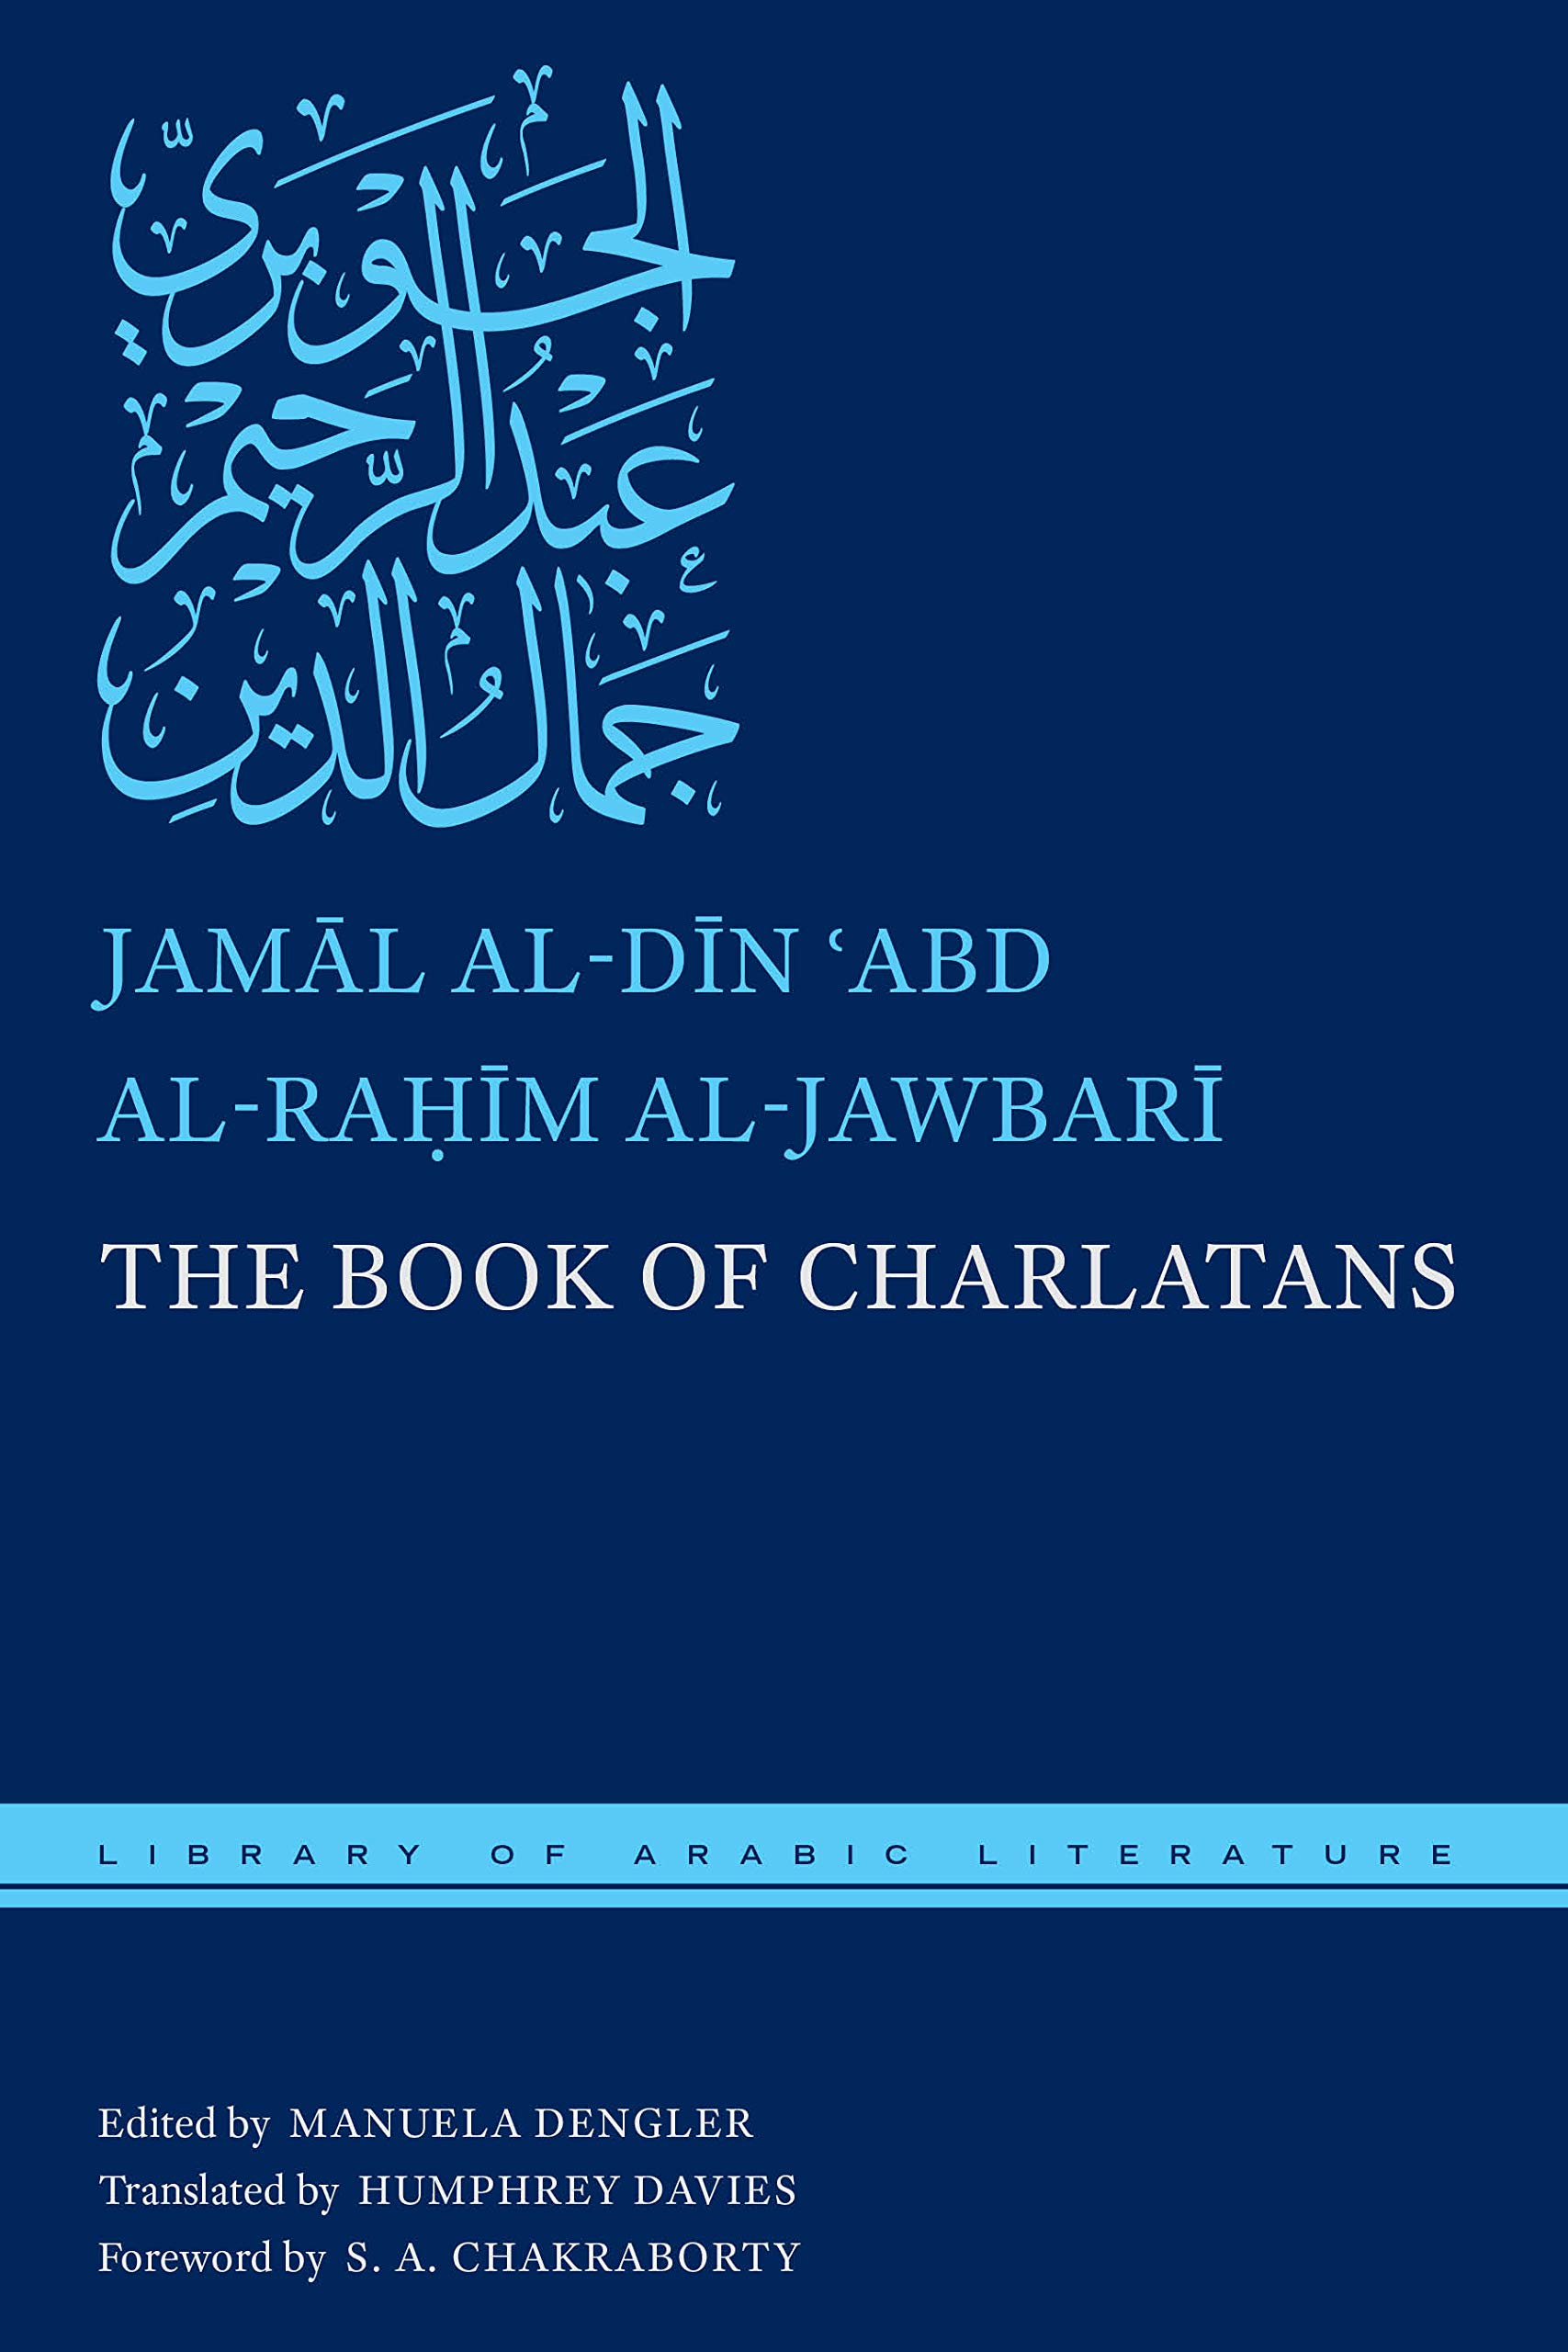 Al-Jawbari's "The Book of Charlatans", translated from the Arabic by Humphrey Davies (published by New York University; bilingual edition)